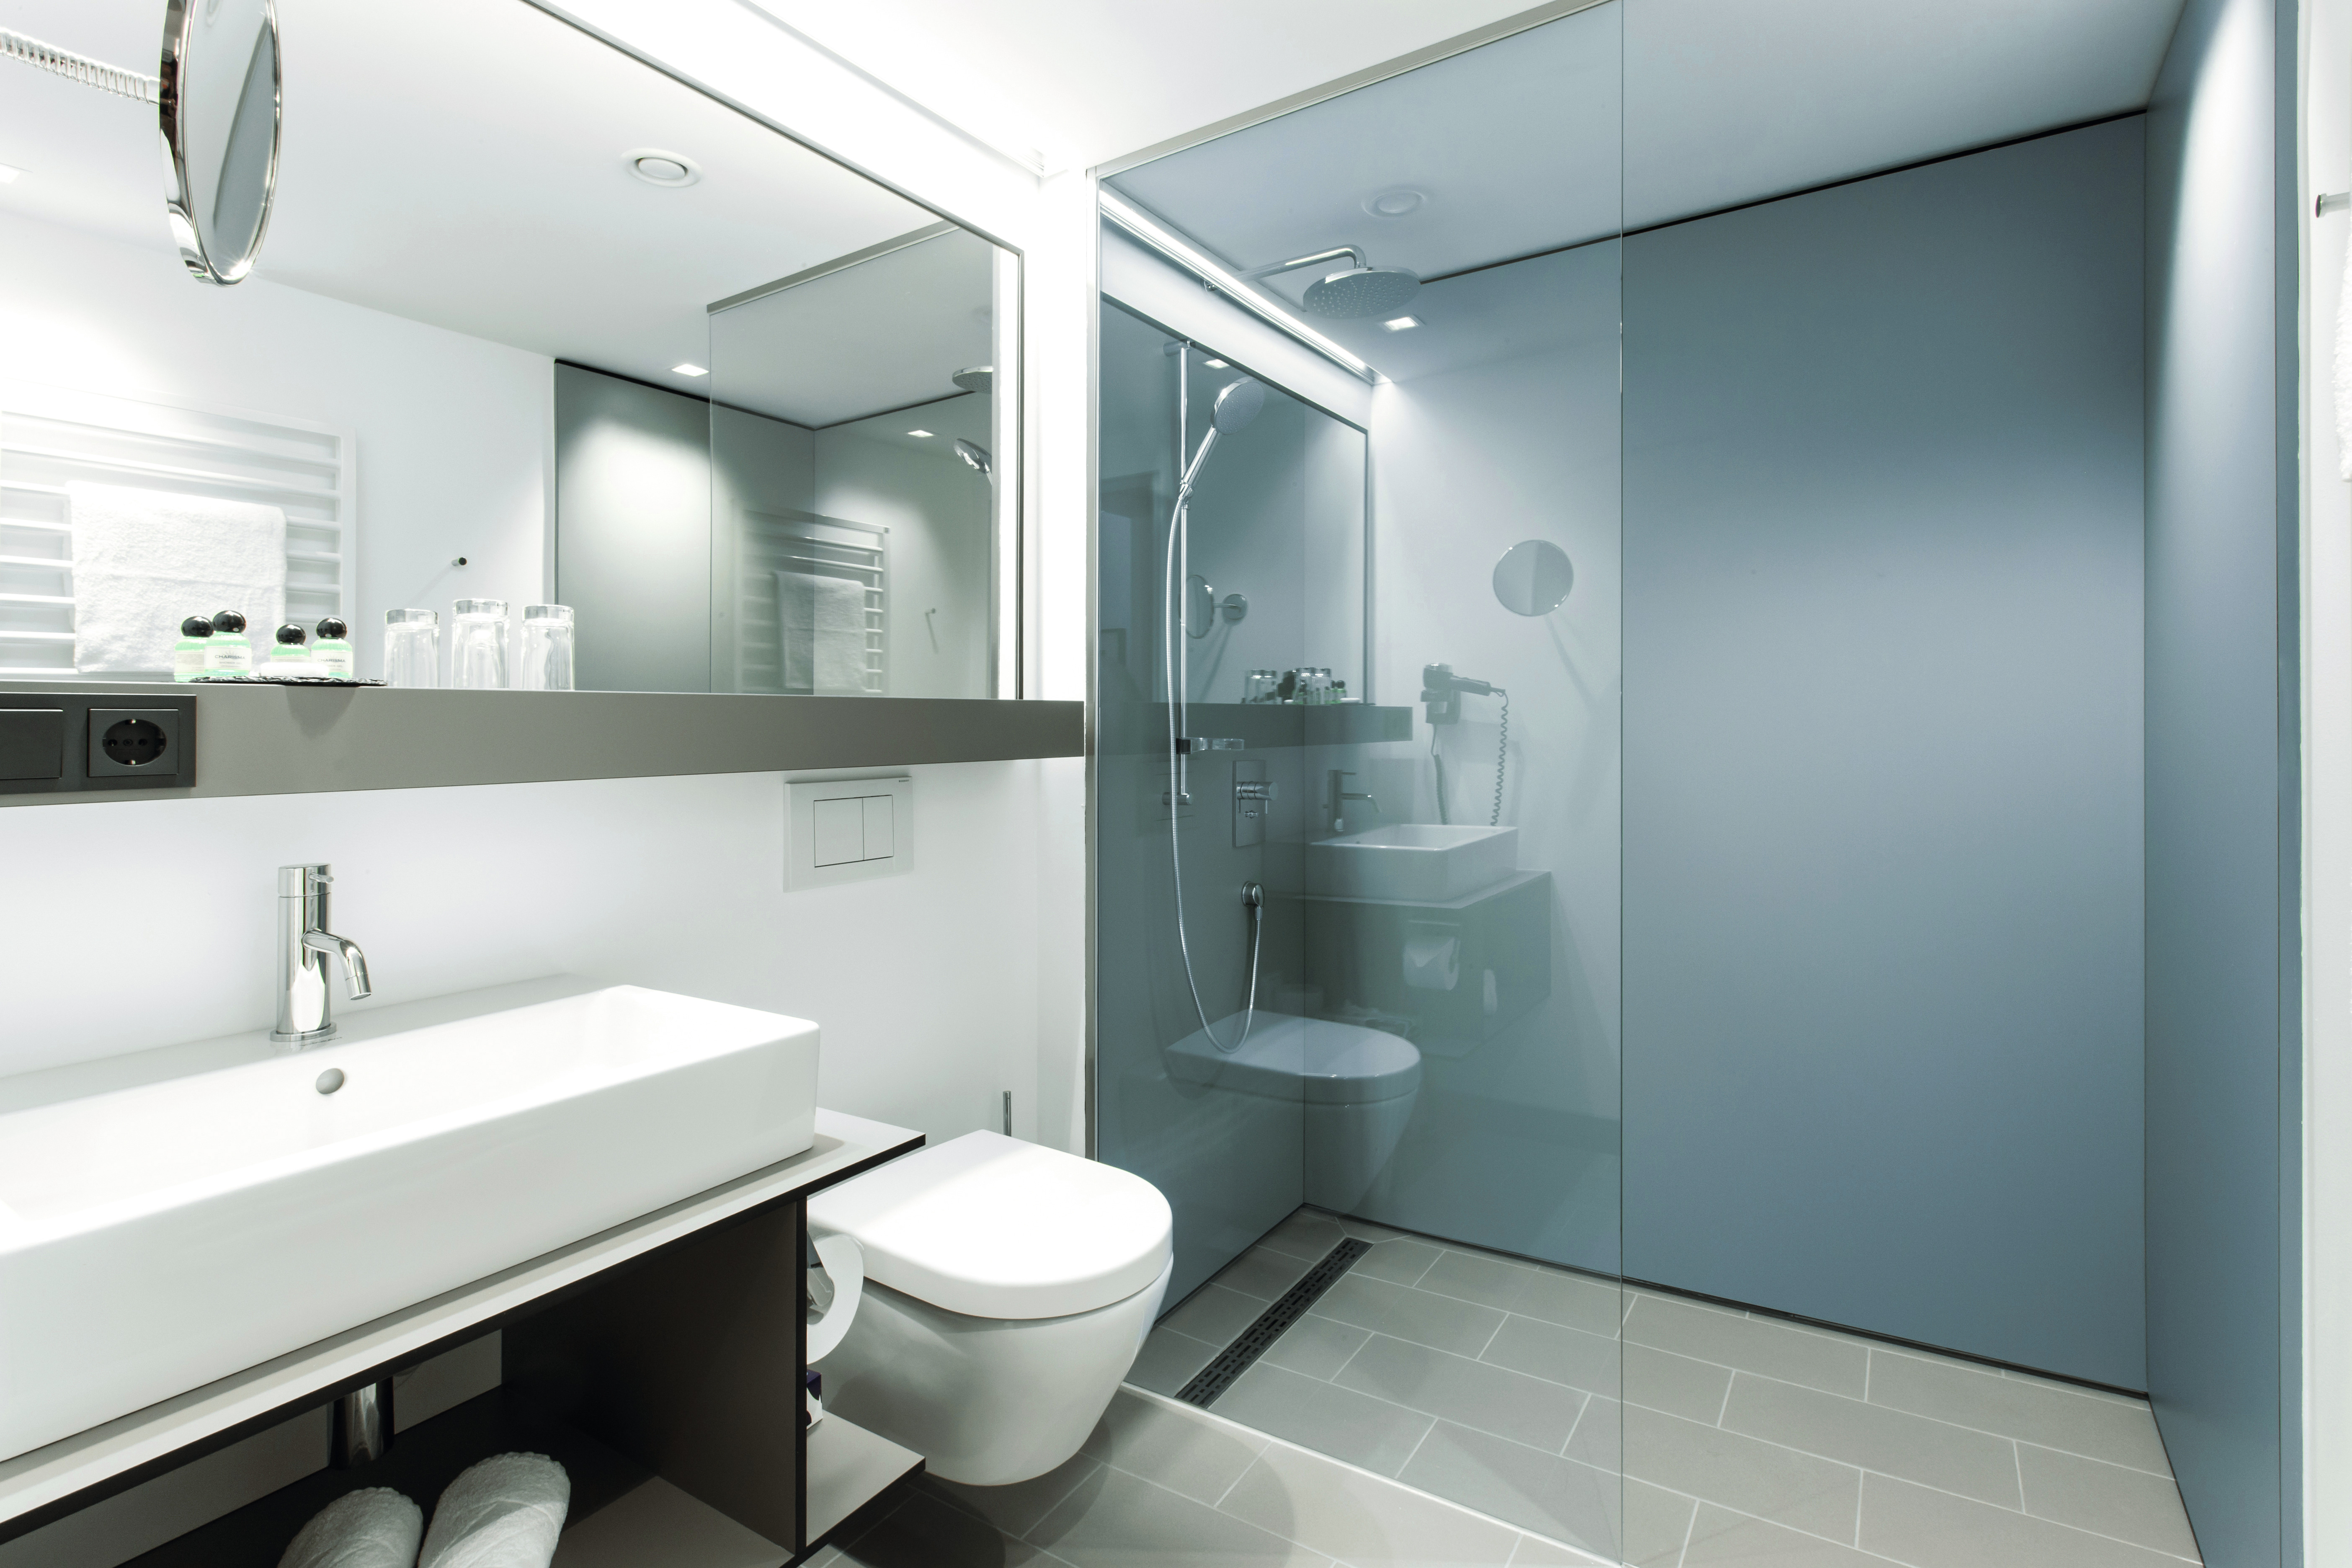 The bathrooms are designed with the EGGER compact laminate U540.